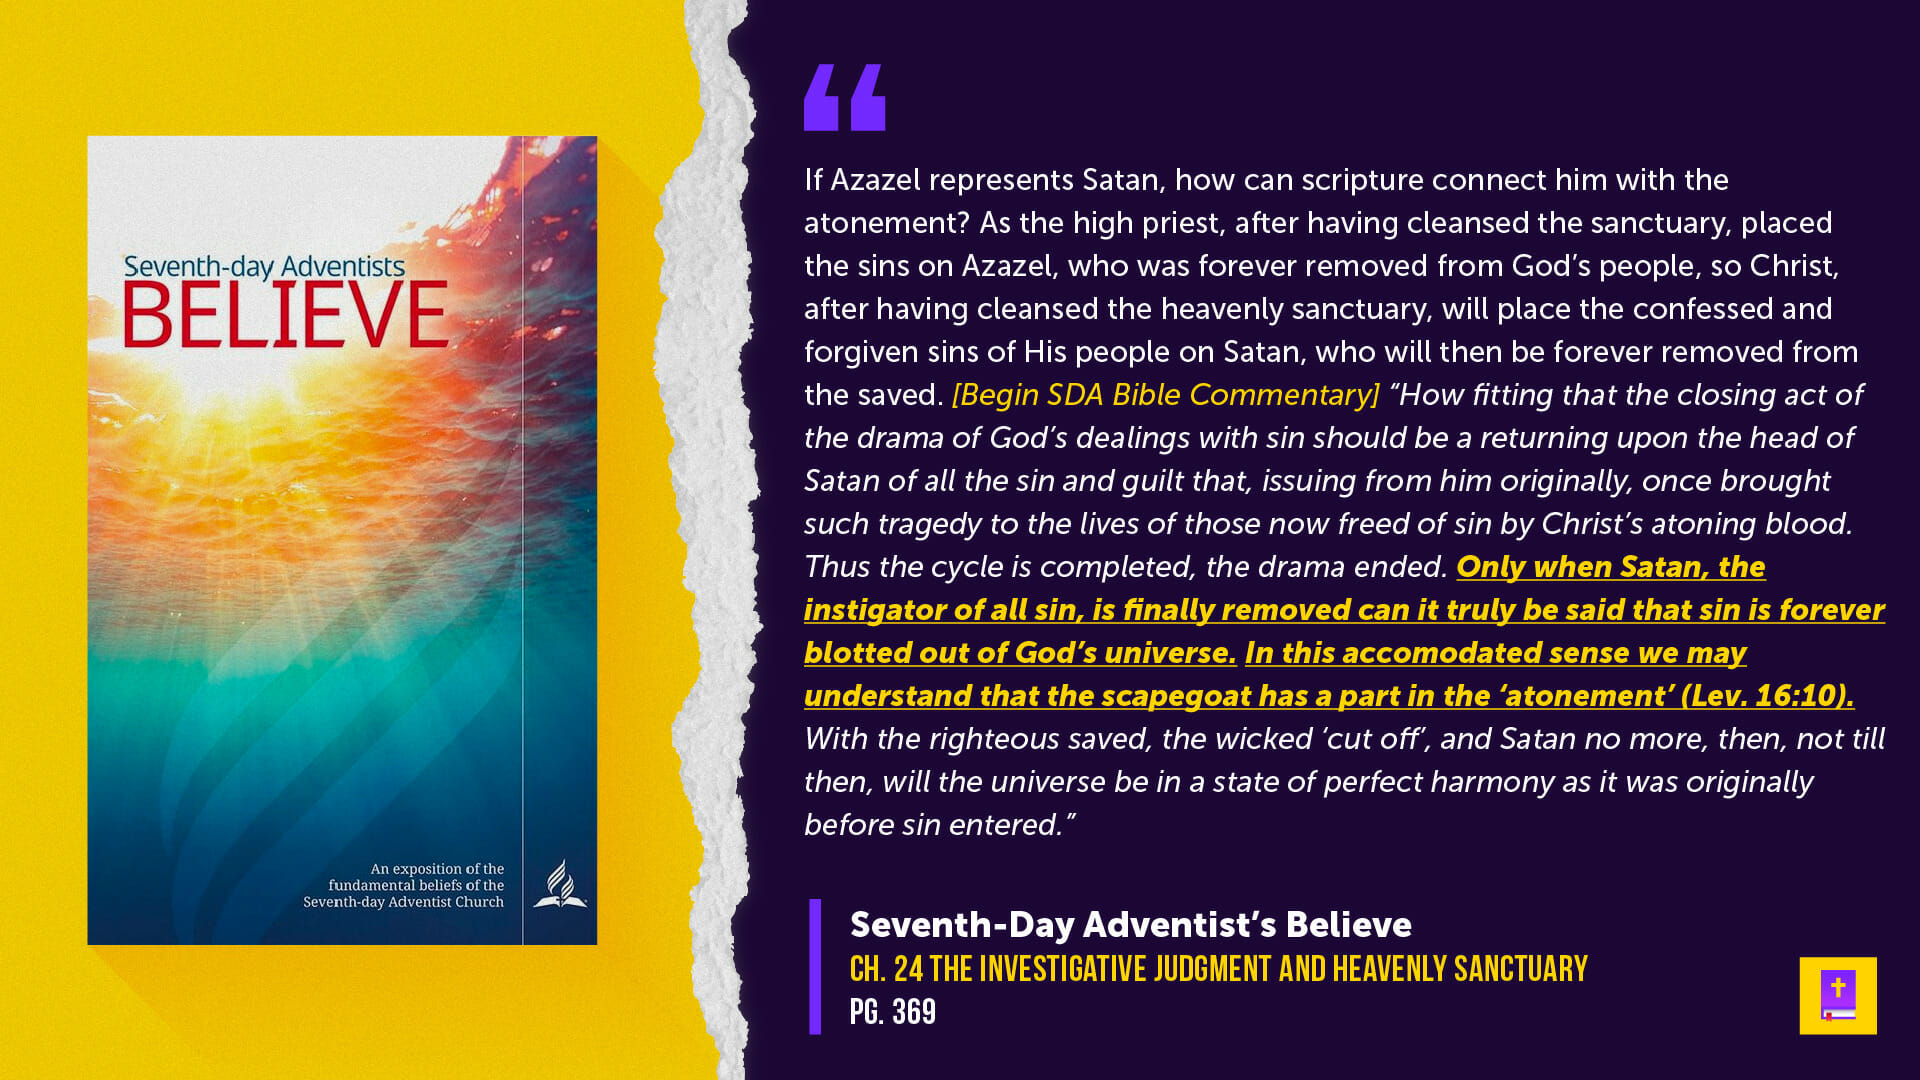 Adventists teach Satan is a part of the atonement